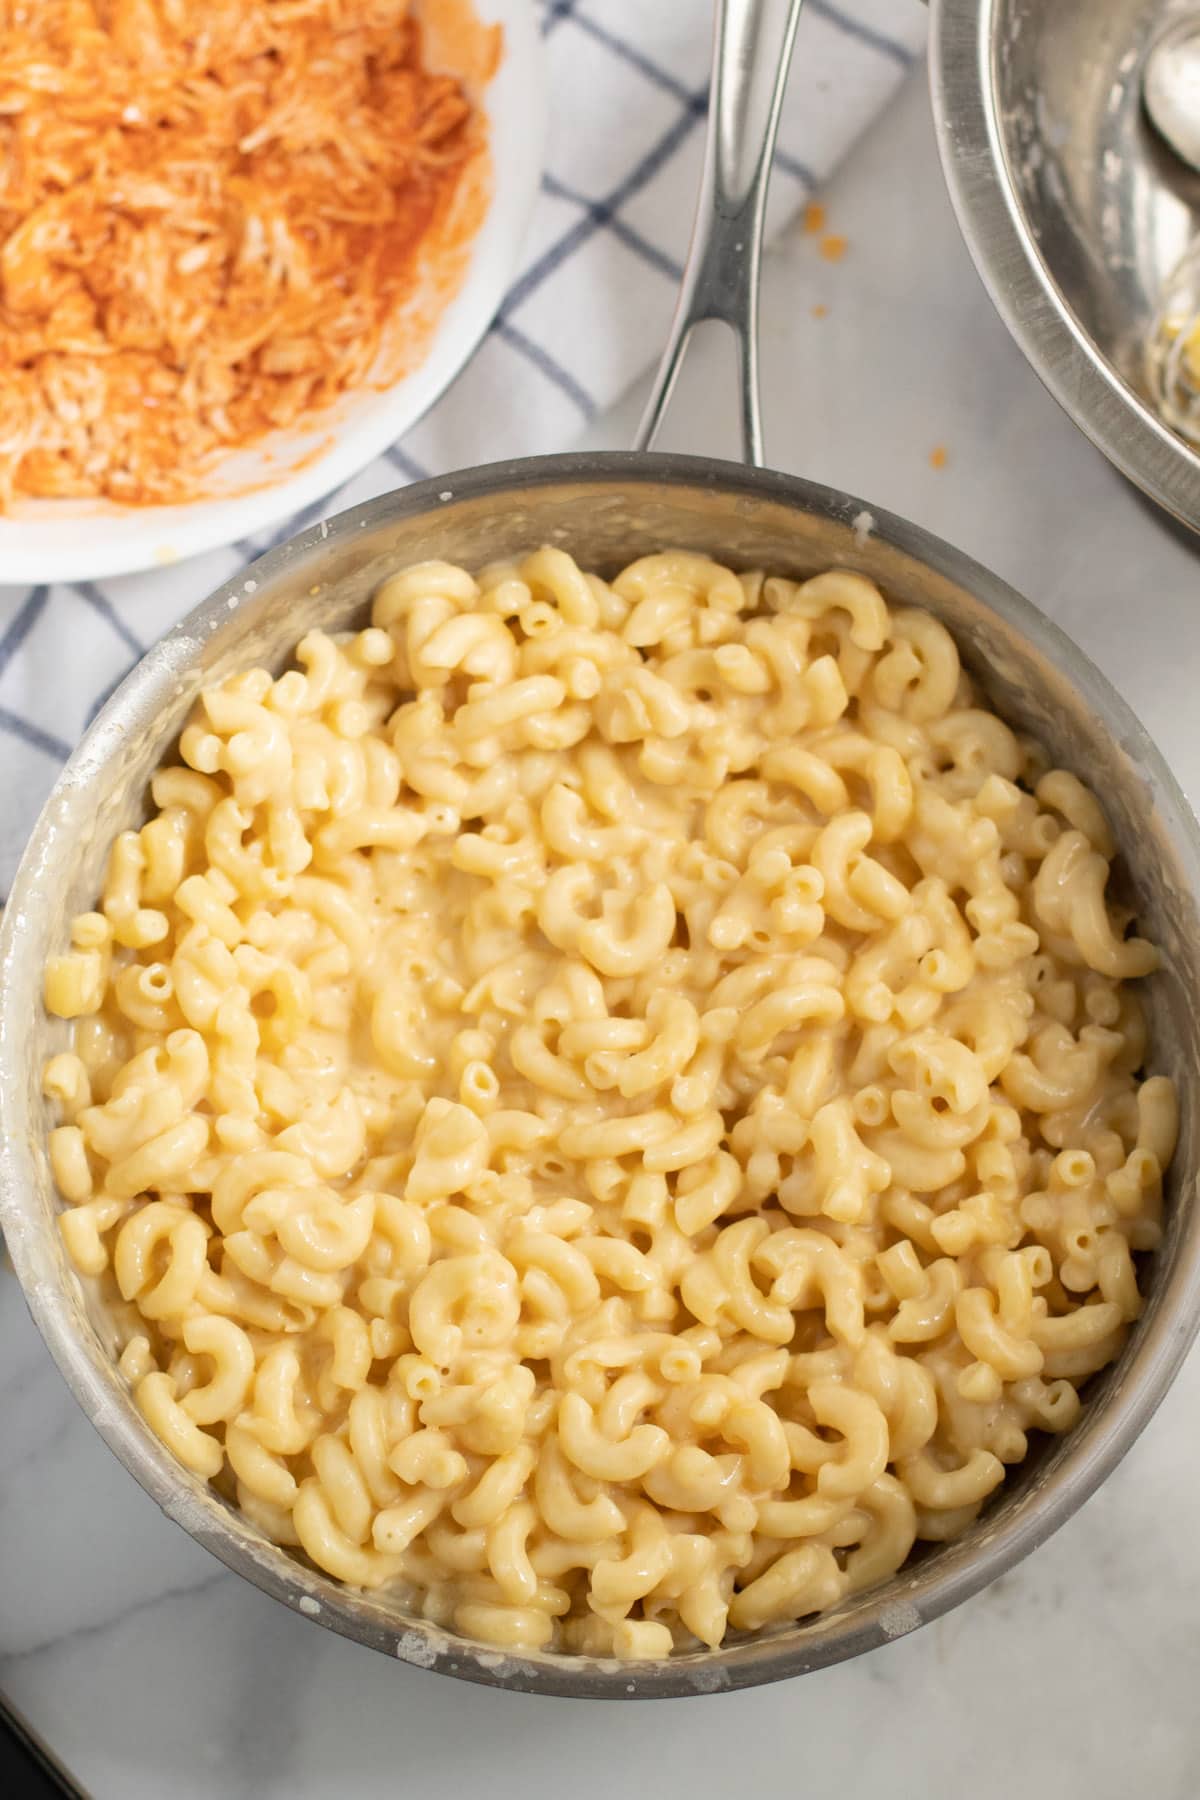 Combine cooked macaroni and shredded chicken in the pan with the sauce